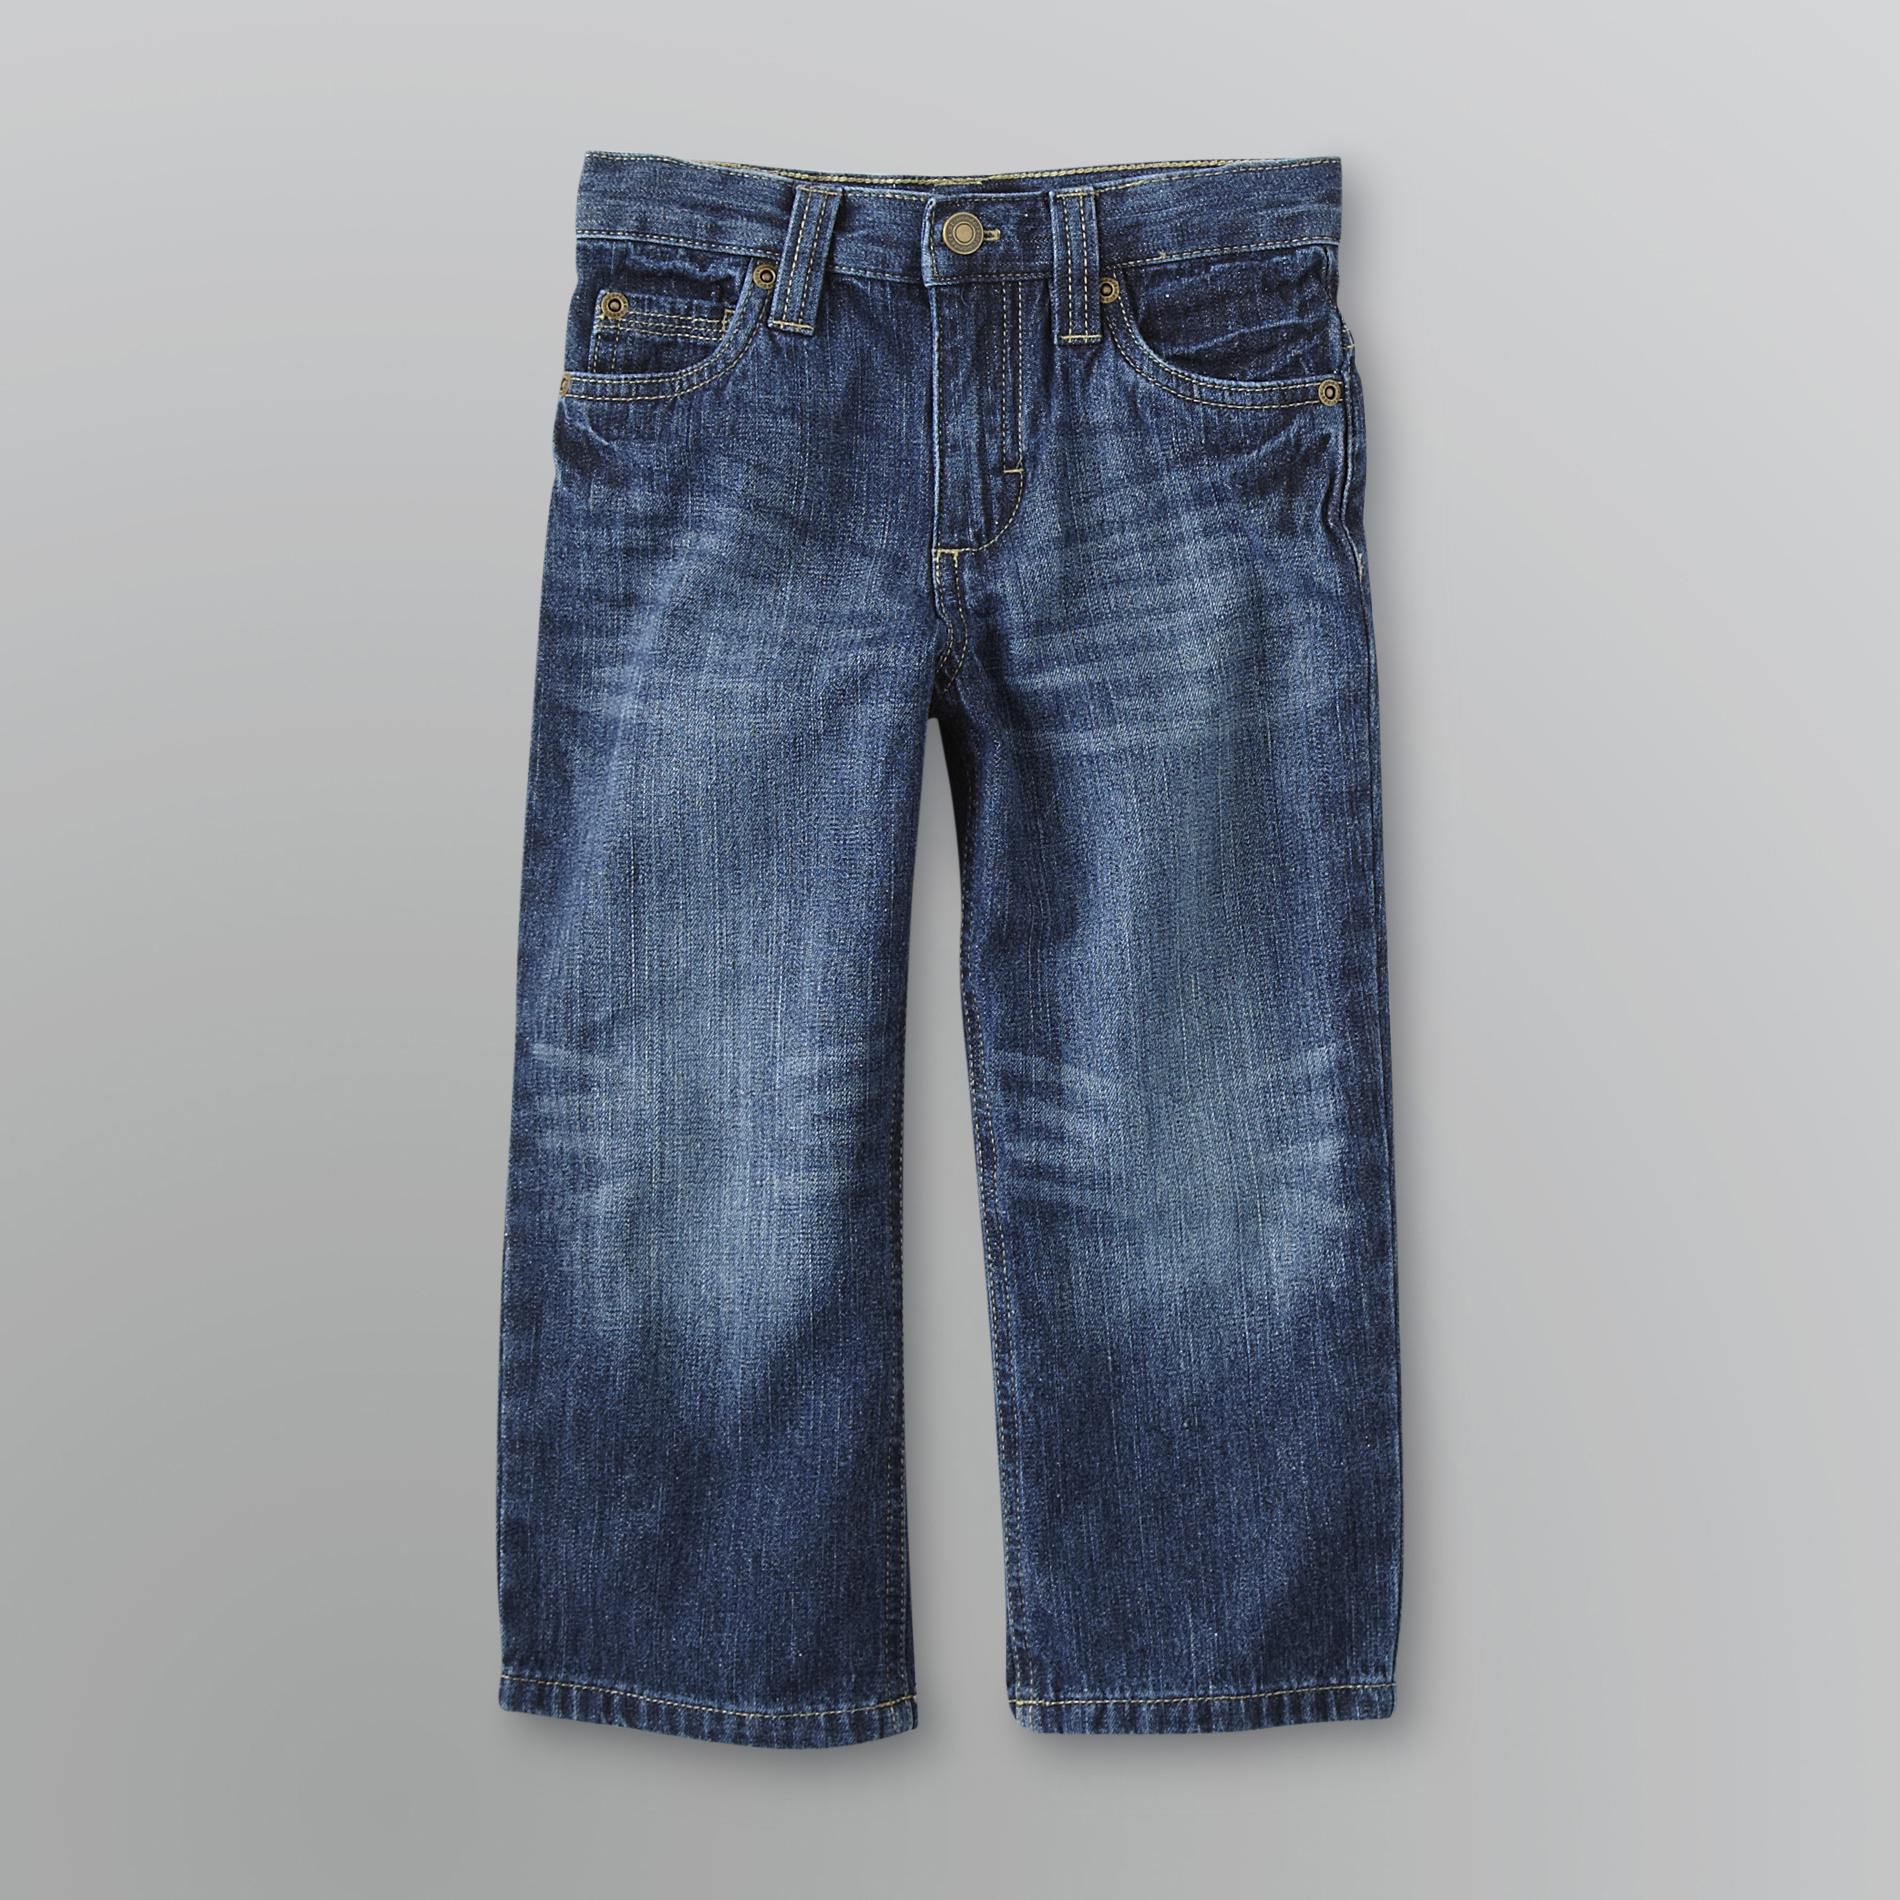 WonderKids Infant & Toddler Boy's Relaxed Fit Jeans